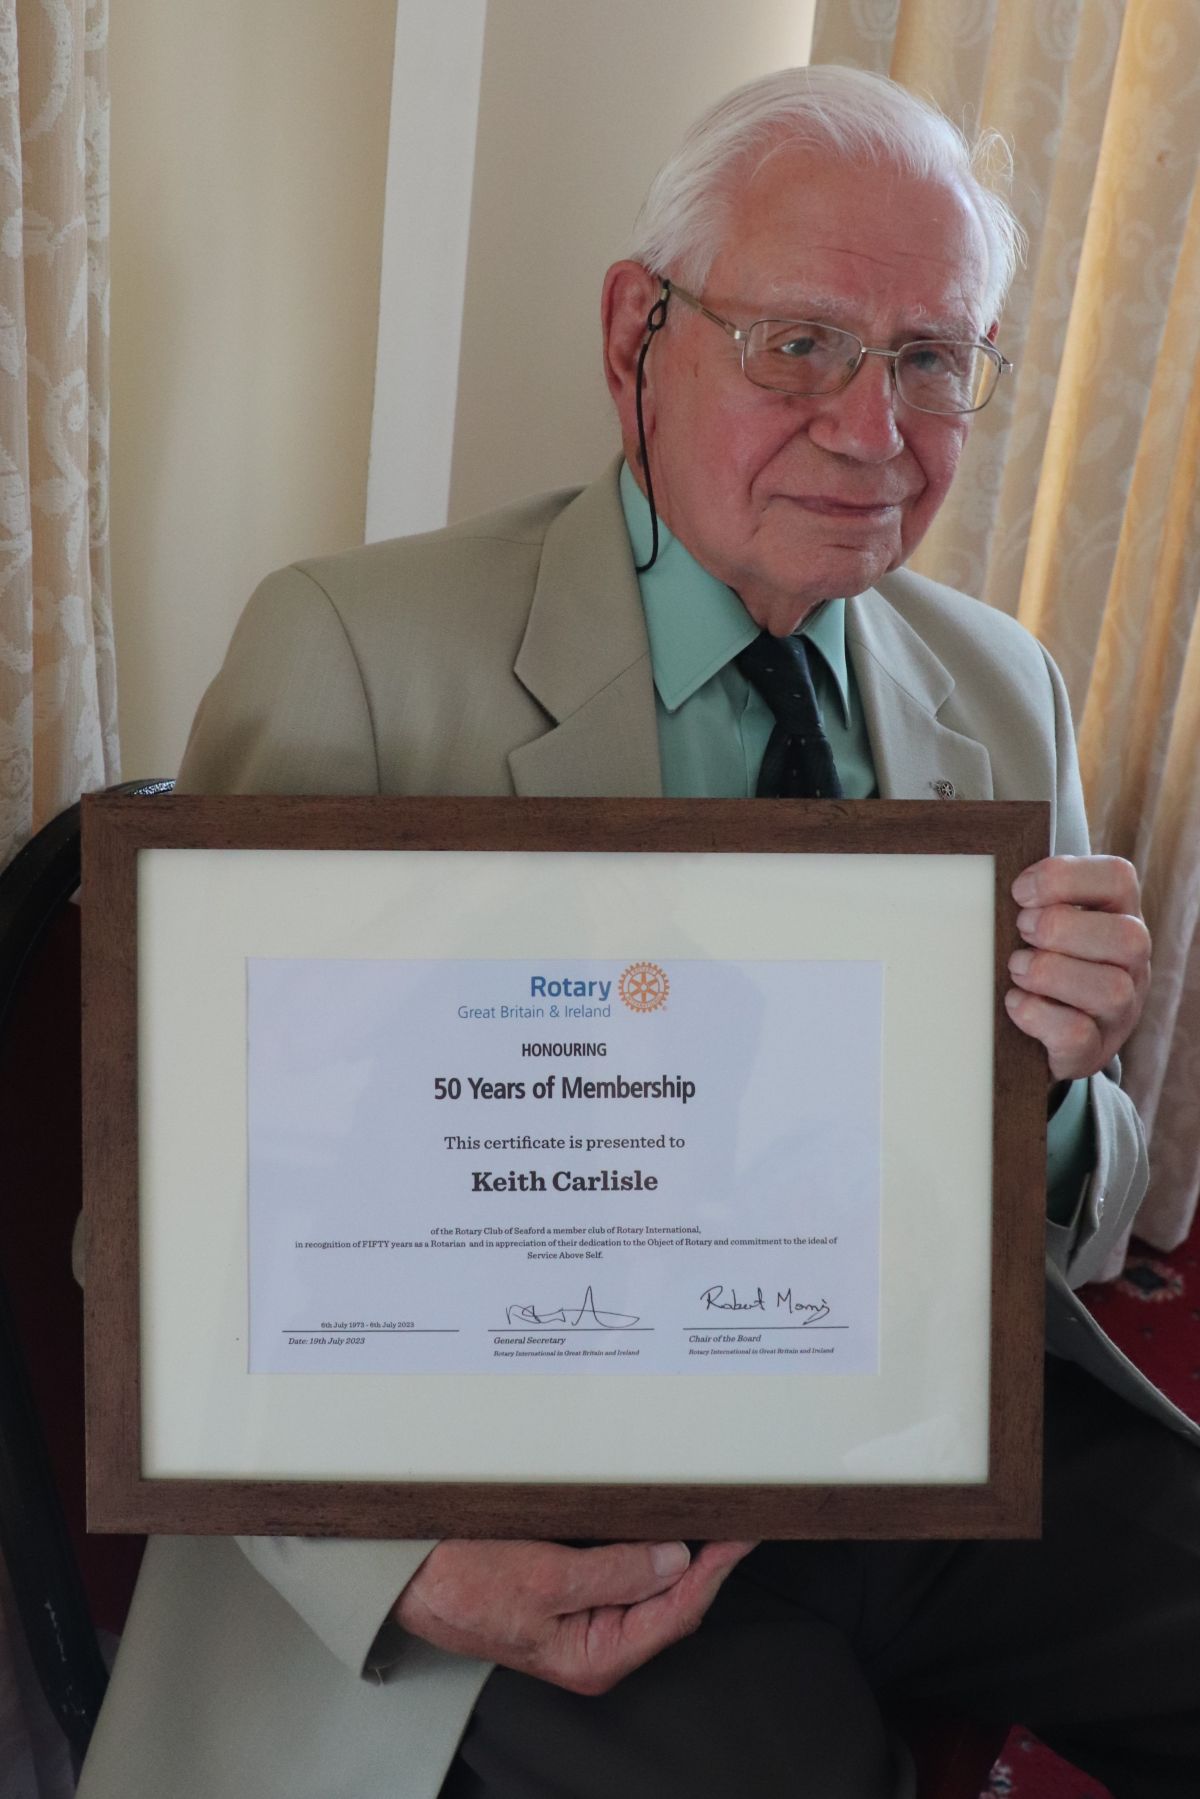 Keith Carlisle 50 Years Service Celebration - Keith Carlisle with the unique framed certificate commemorating his 50 years of service